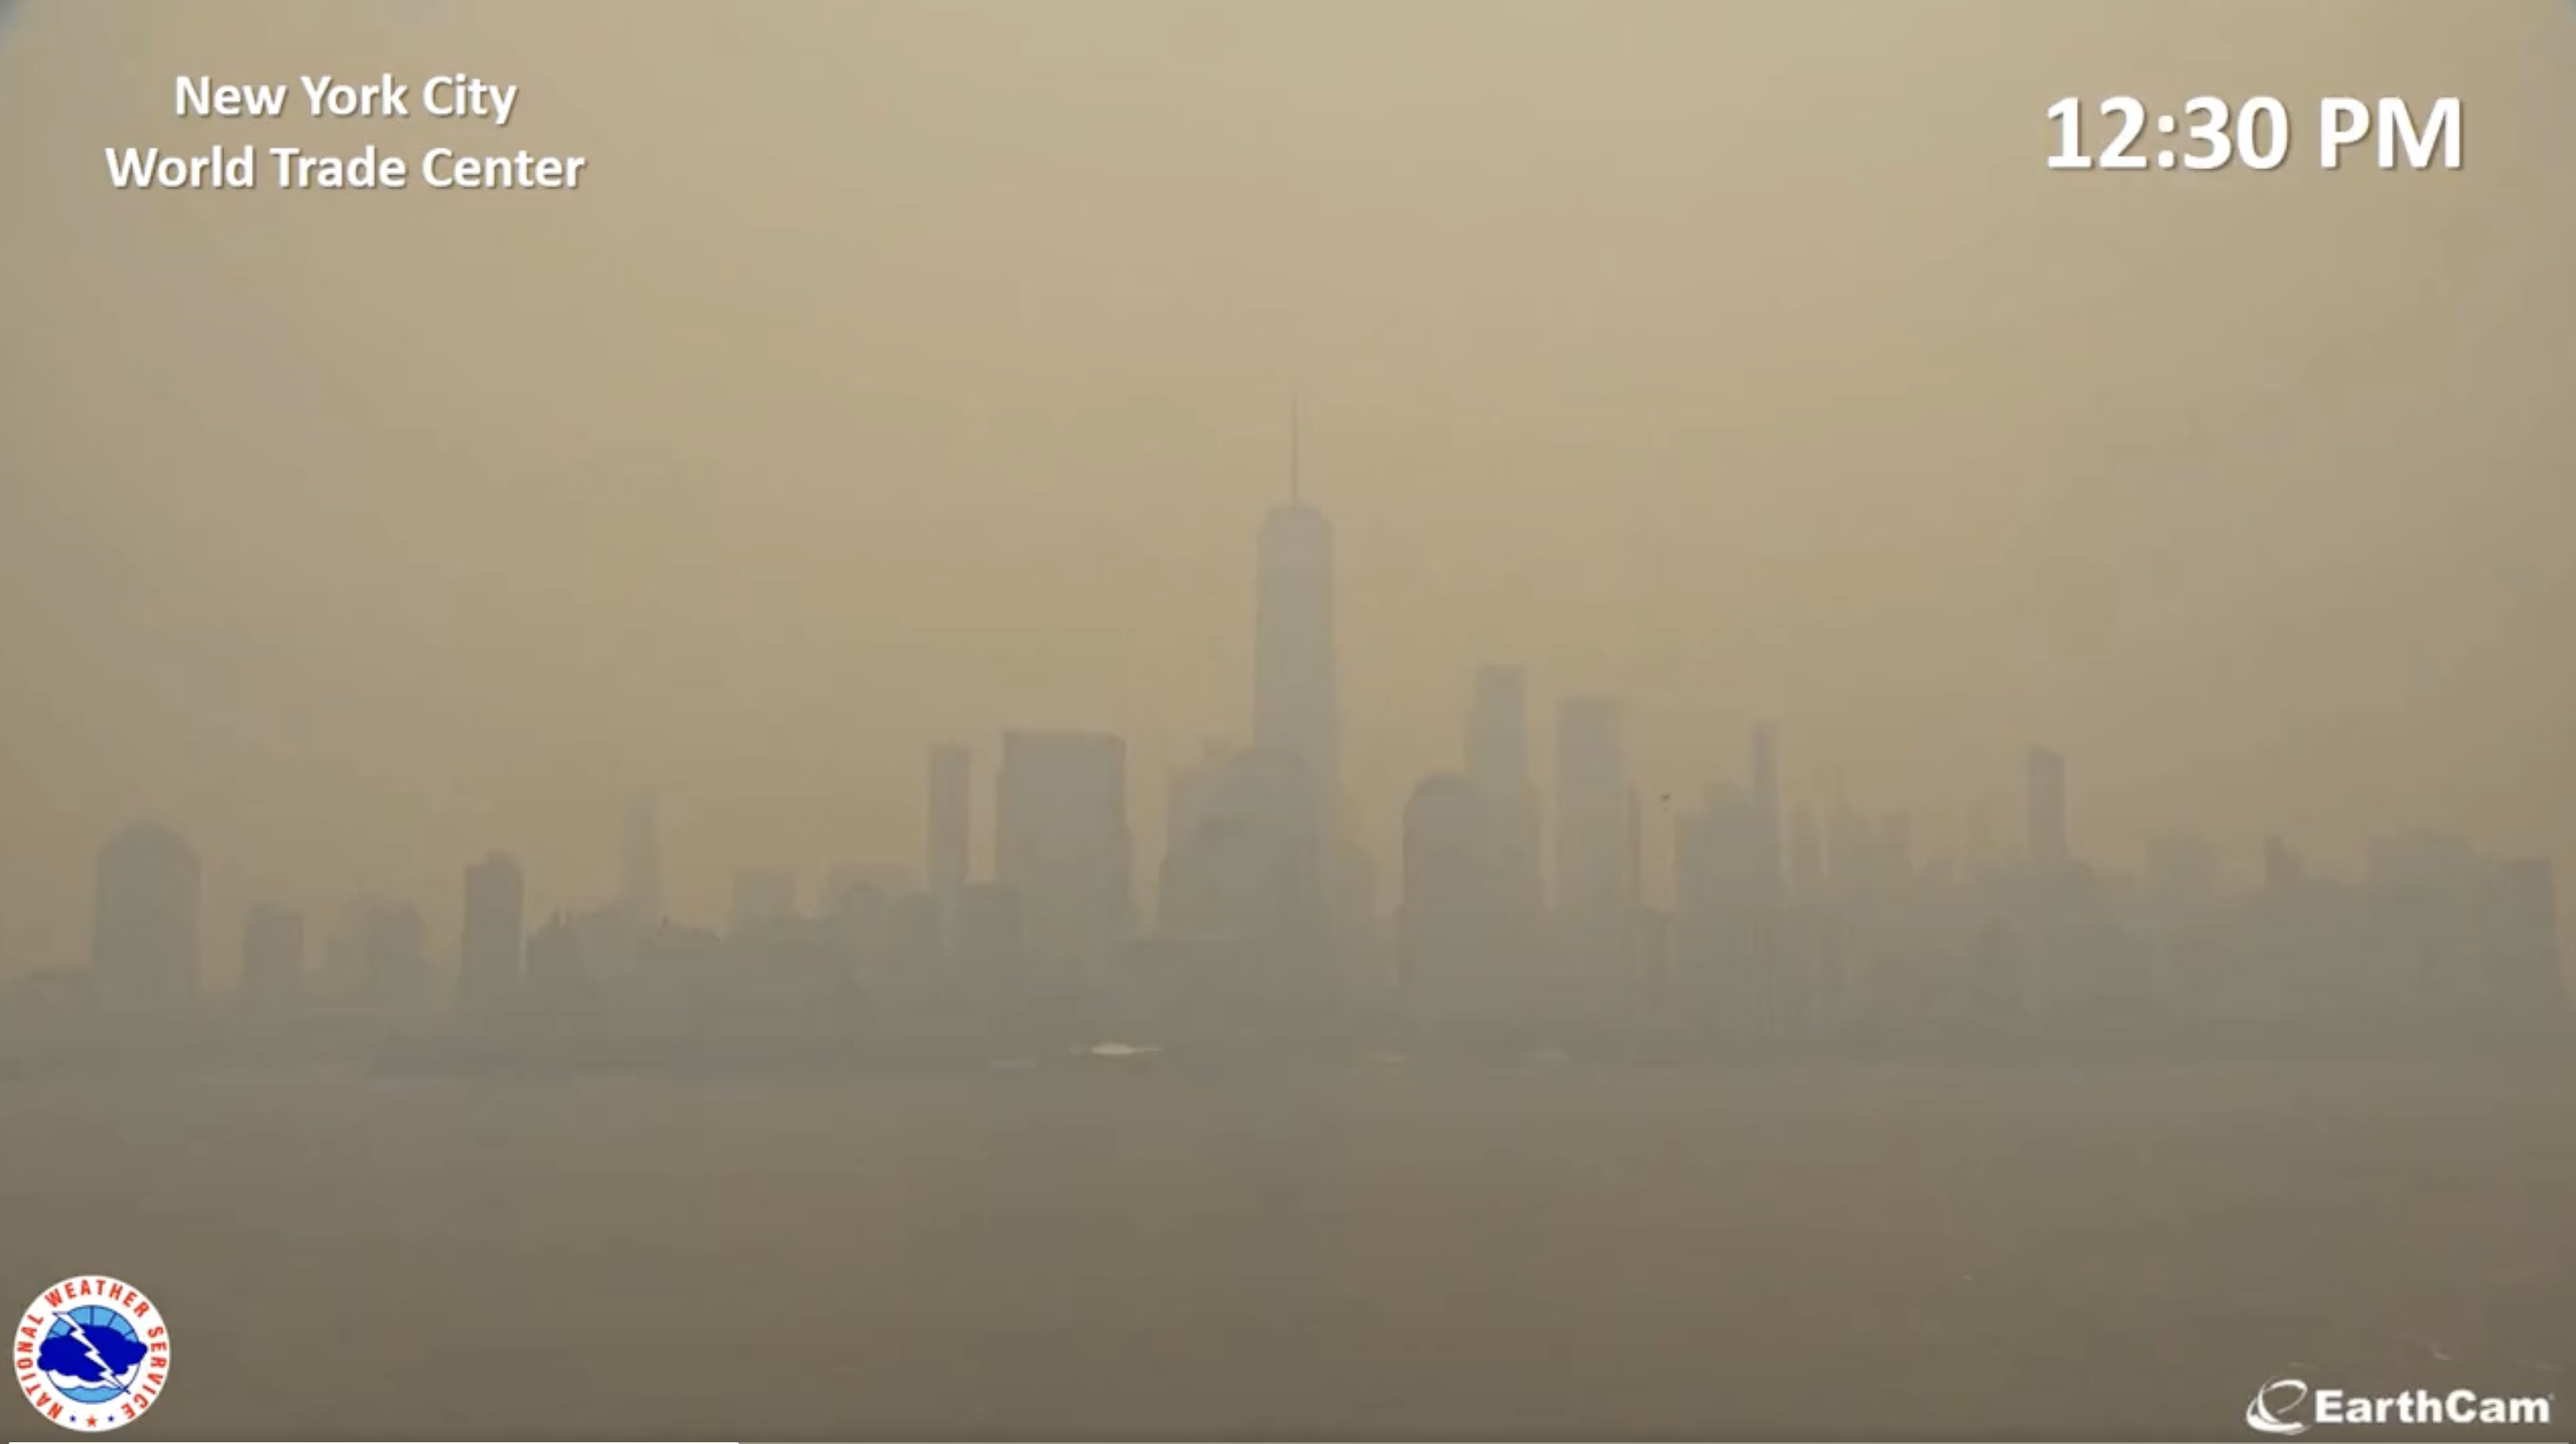 View of the downtown Manhattan skyline at 12:30 pm, with the sky a light orange